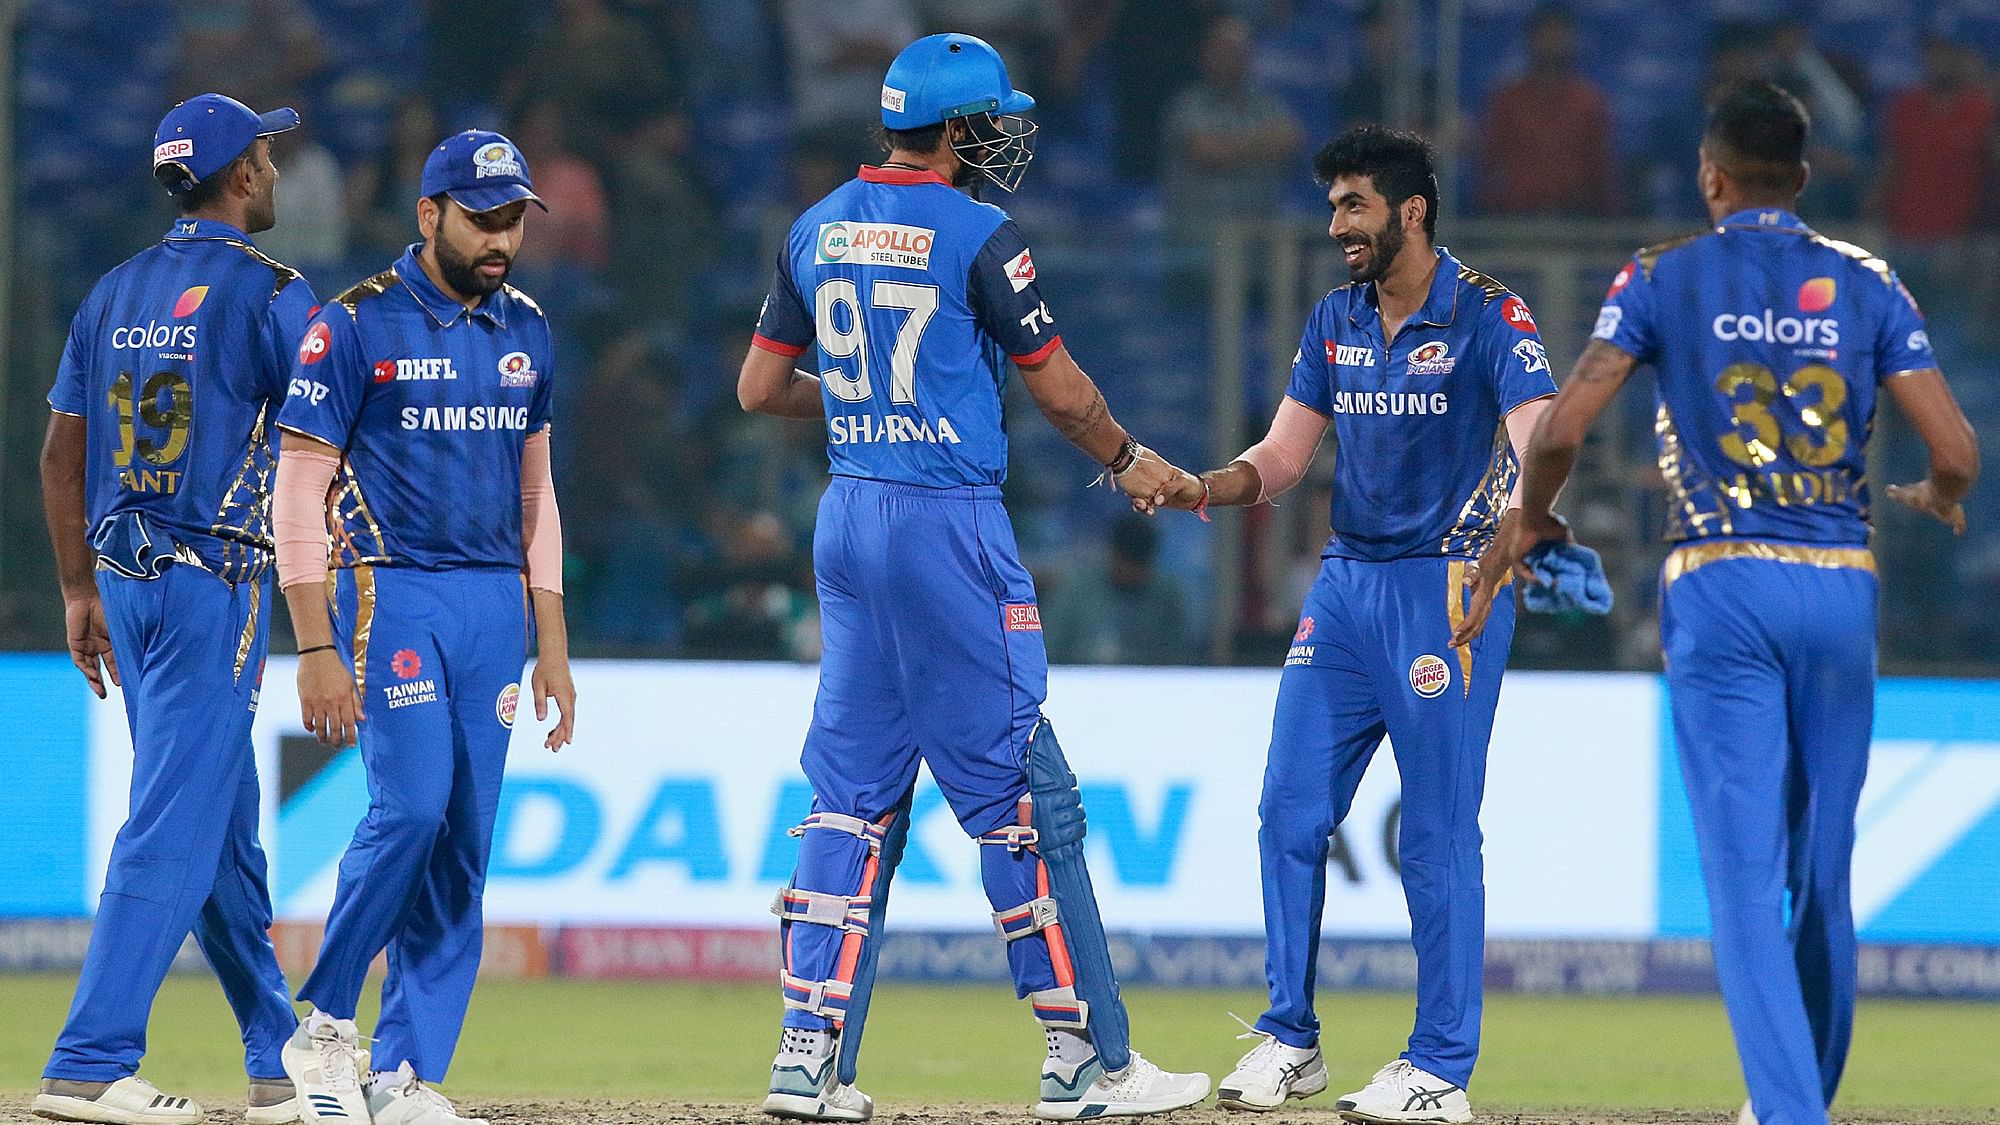  Chasing 169, Delhi Capitals could only manage 128/9 in their 20 overs.